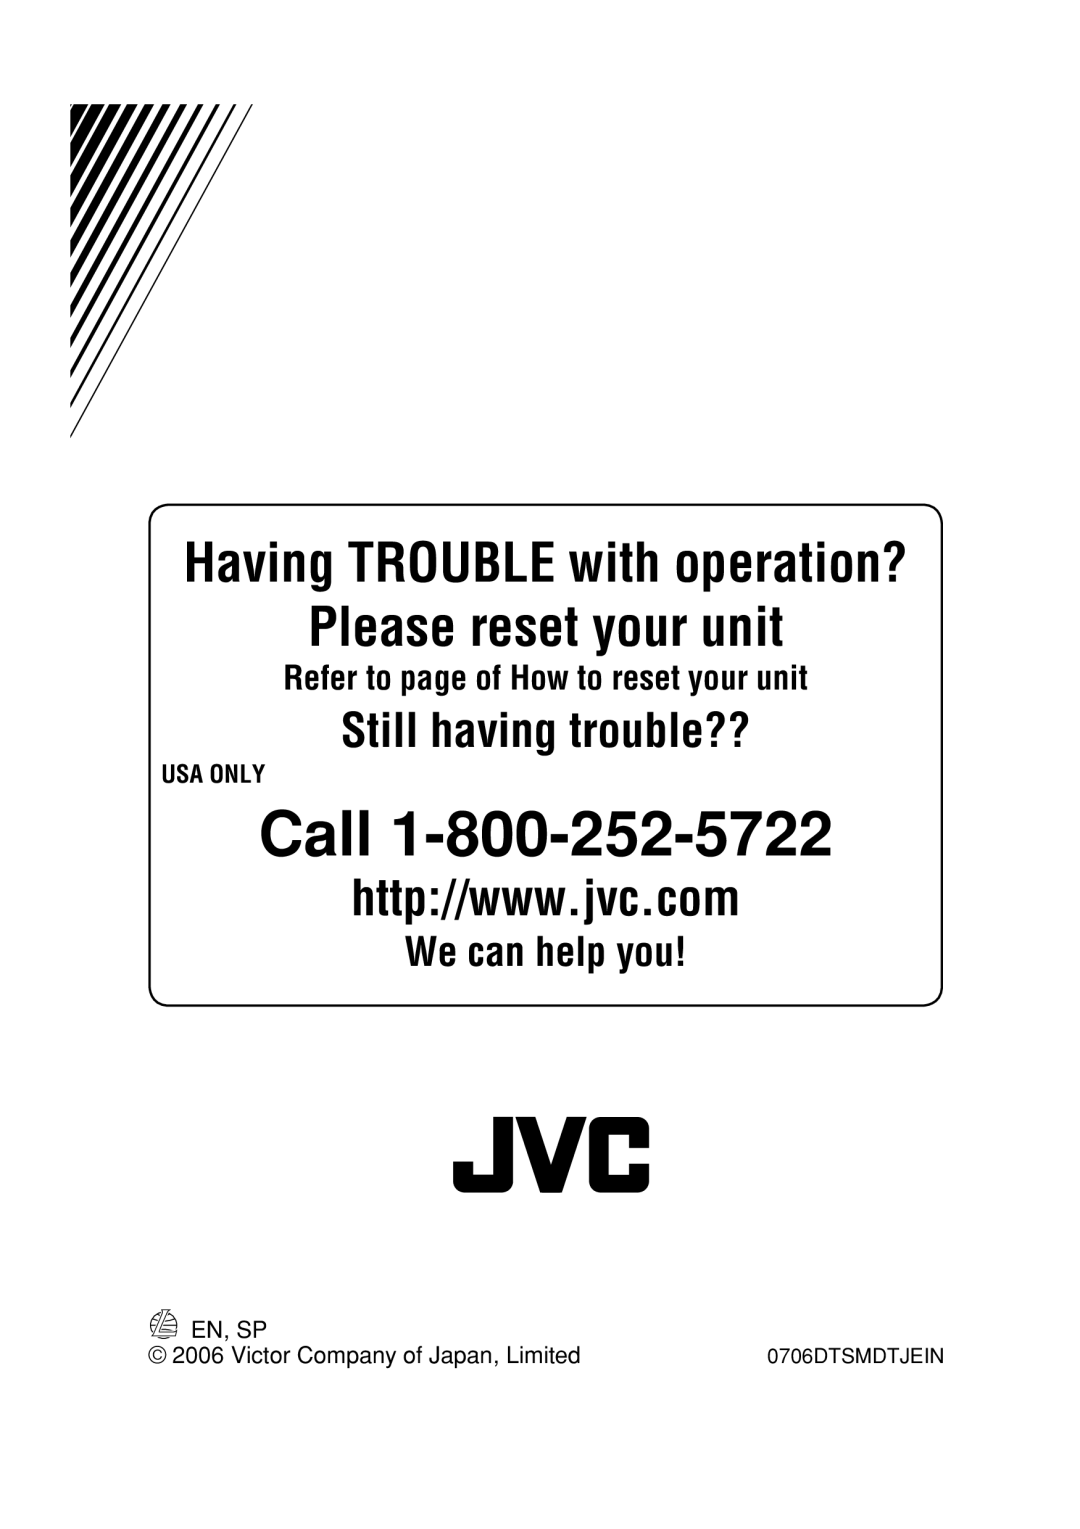 JVC KD-S33 manual En, Sp, Victor Company of Japan, Limited, Call, Please reset your unit, Having TROUBLE with operation? 